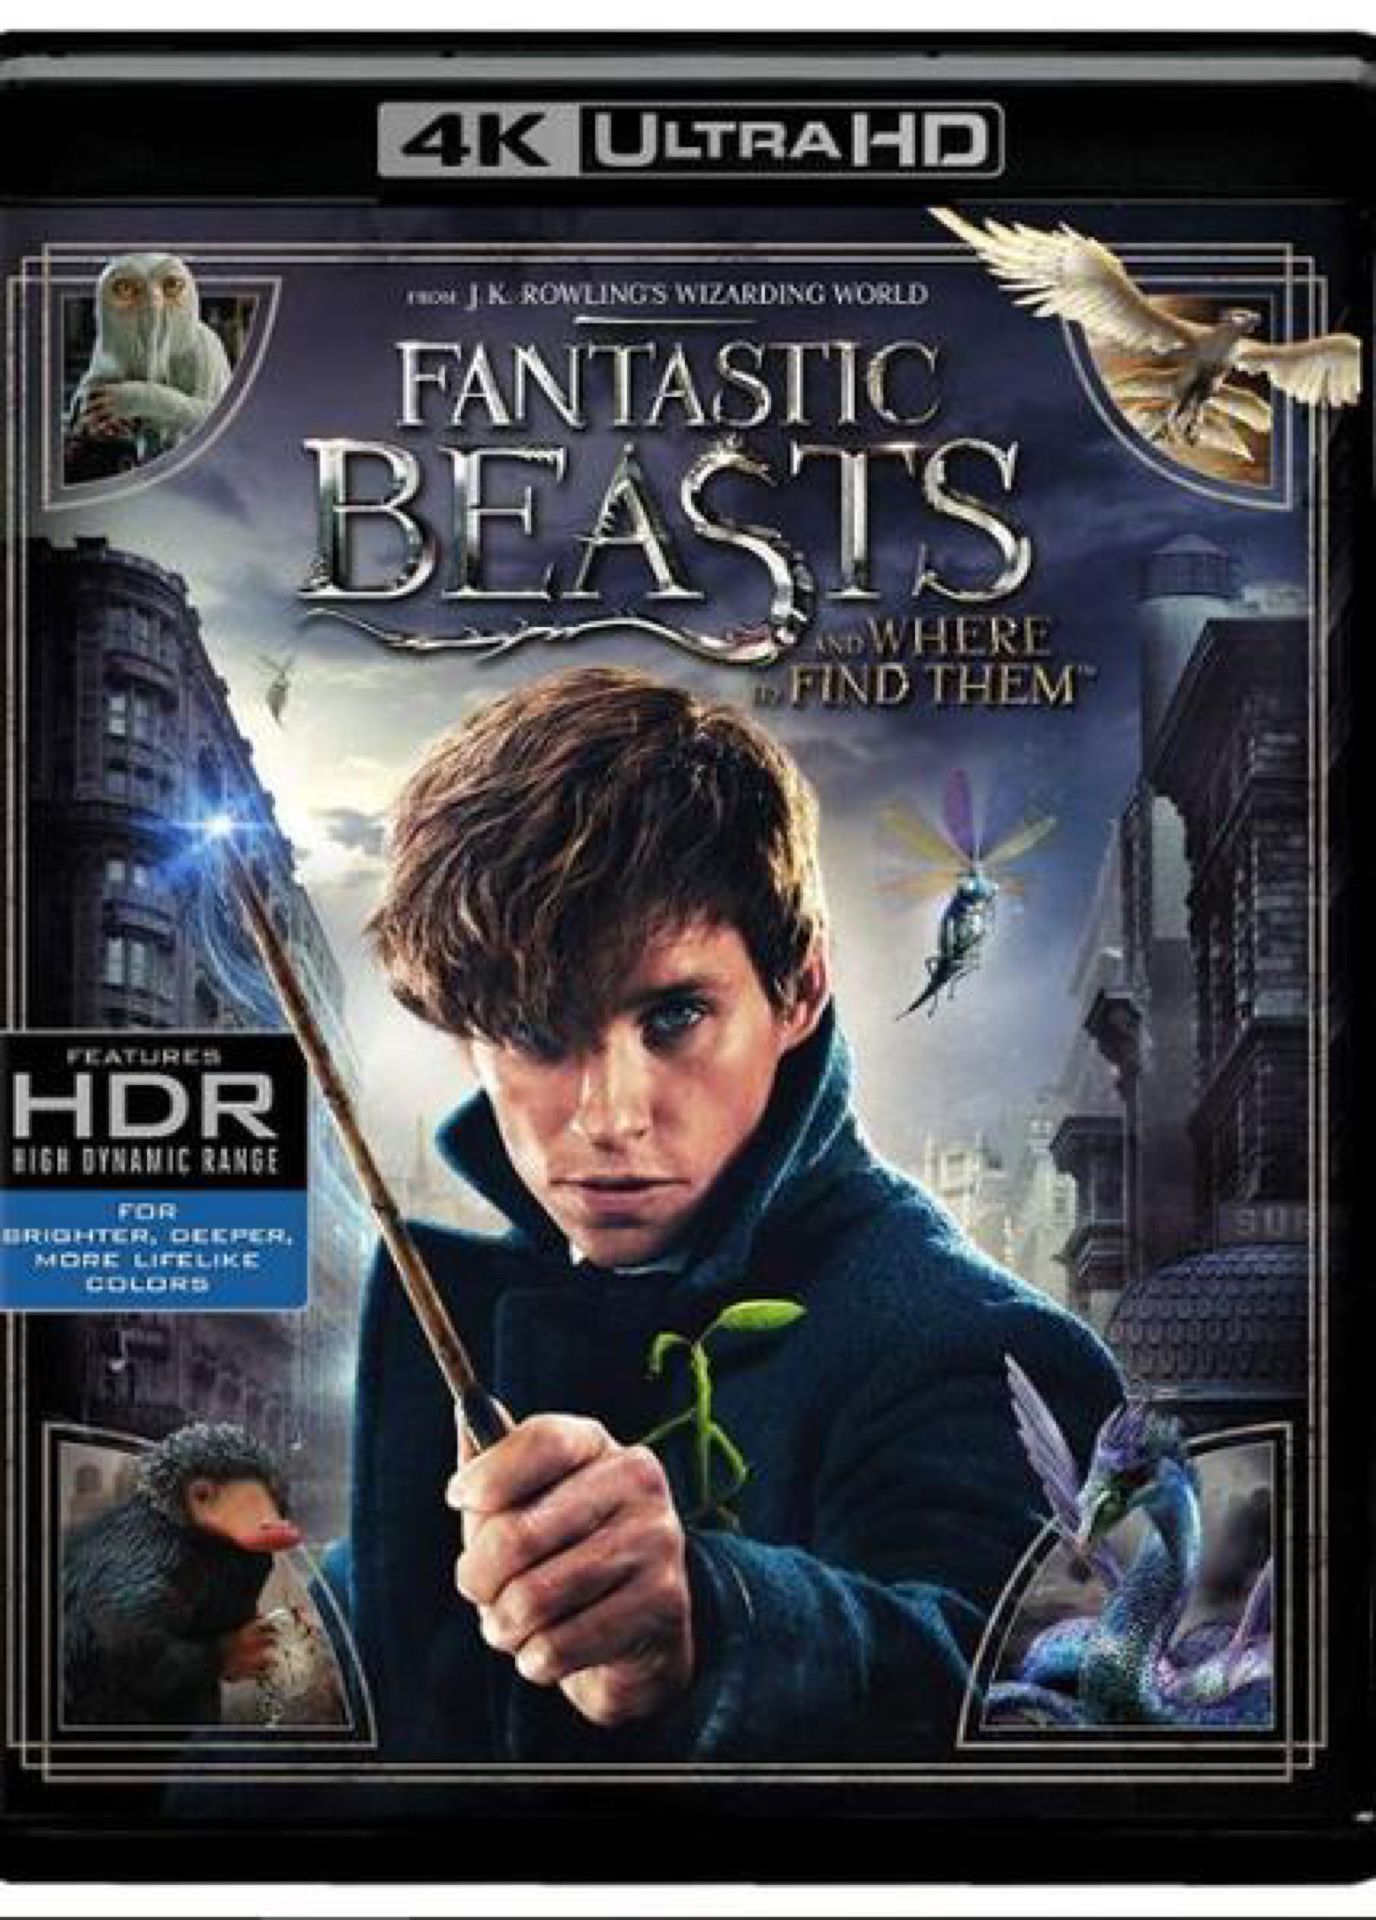 FANTASTIC BEASTS AND WHERE TO FIND THEM (4K MA) digital movie code. Instant delivery! Free Shipping! (DC4)